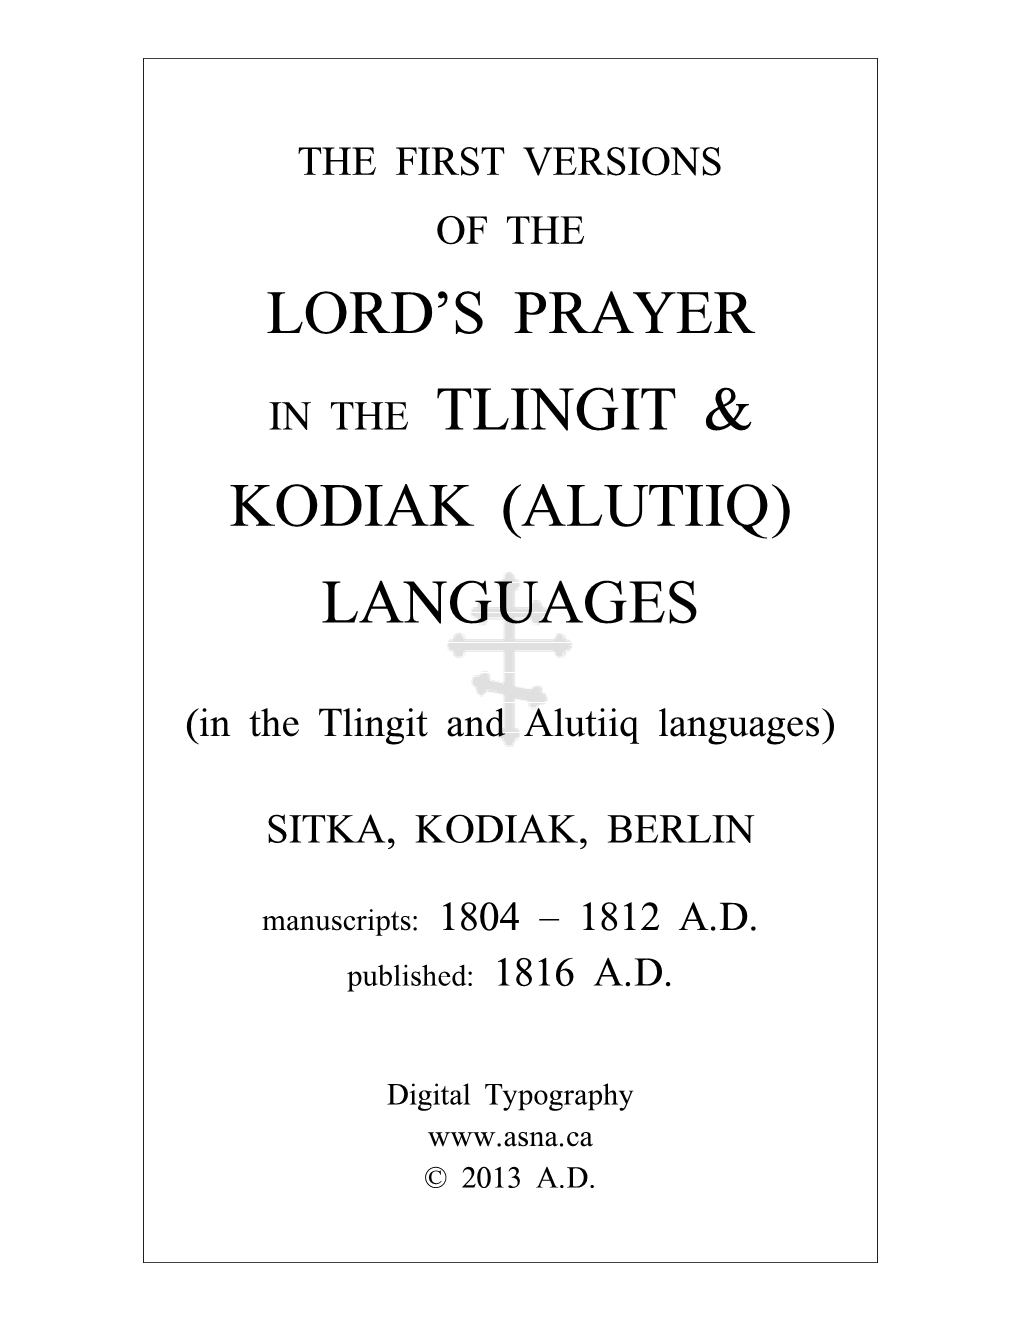 The First Versions of the Lord's Prayer in the Tlingit and Kodiak (Alutiiq) Languages